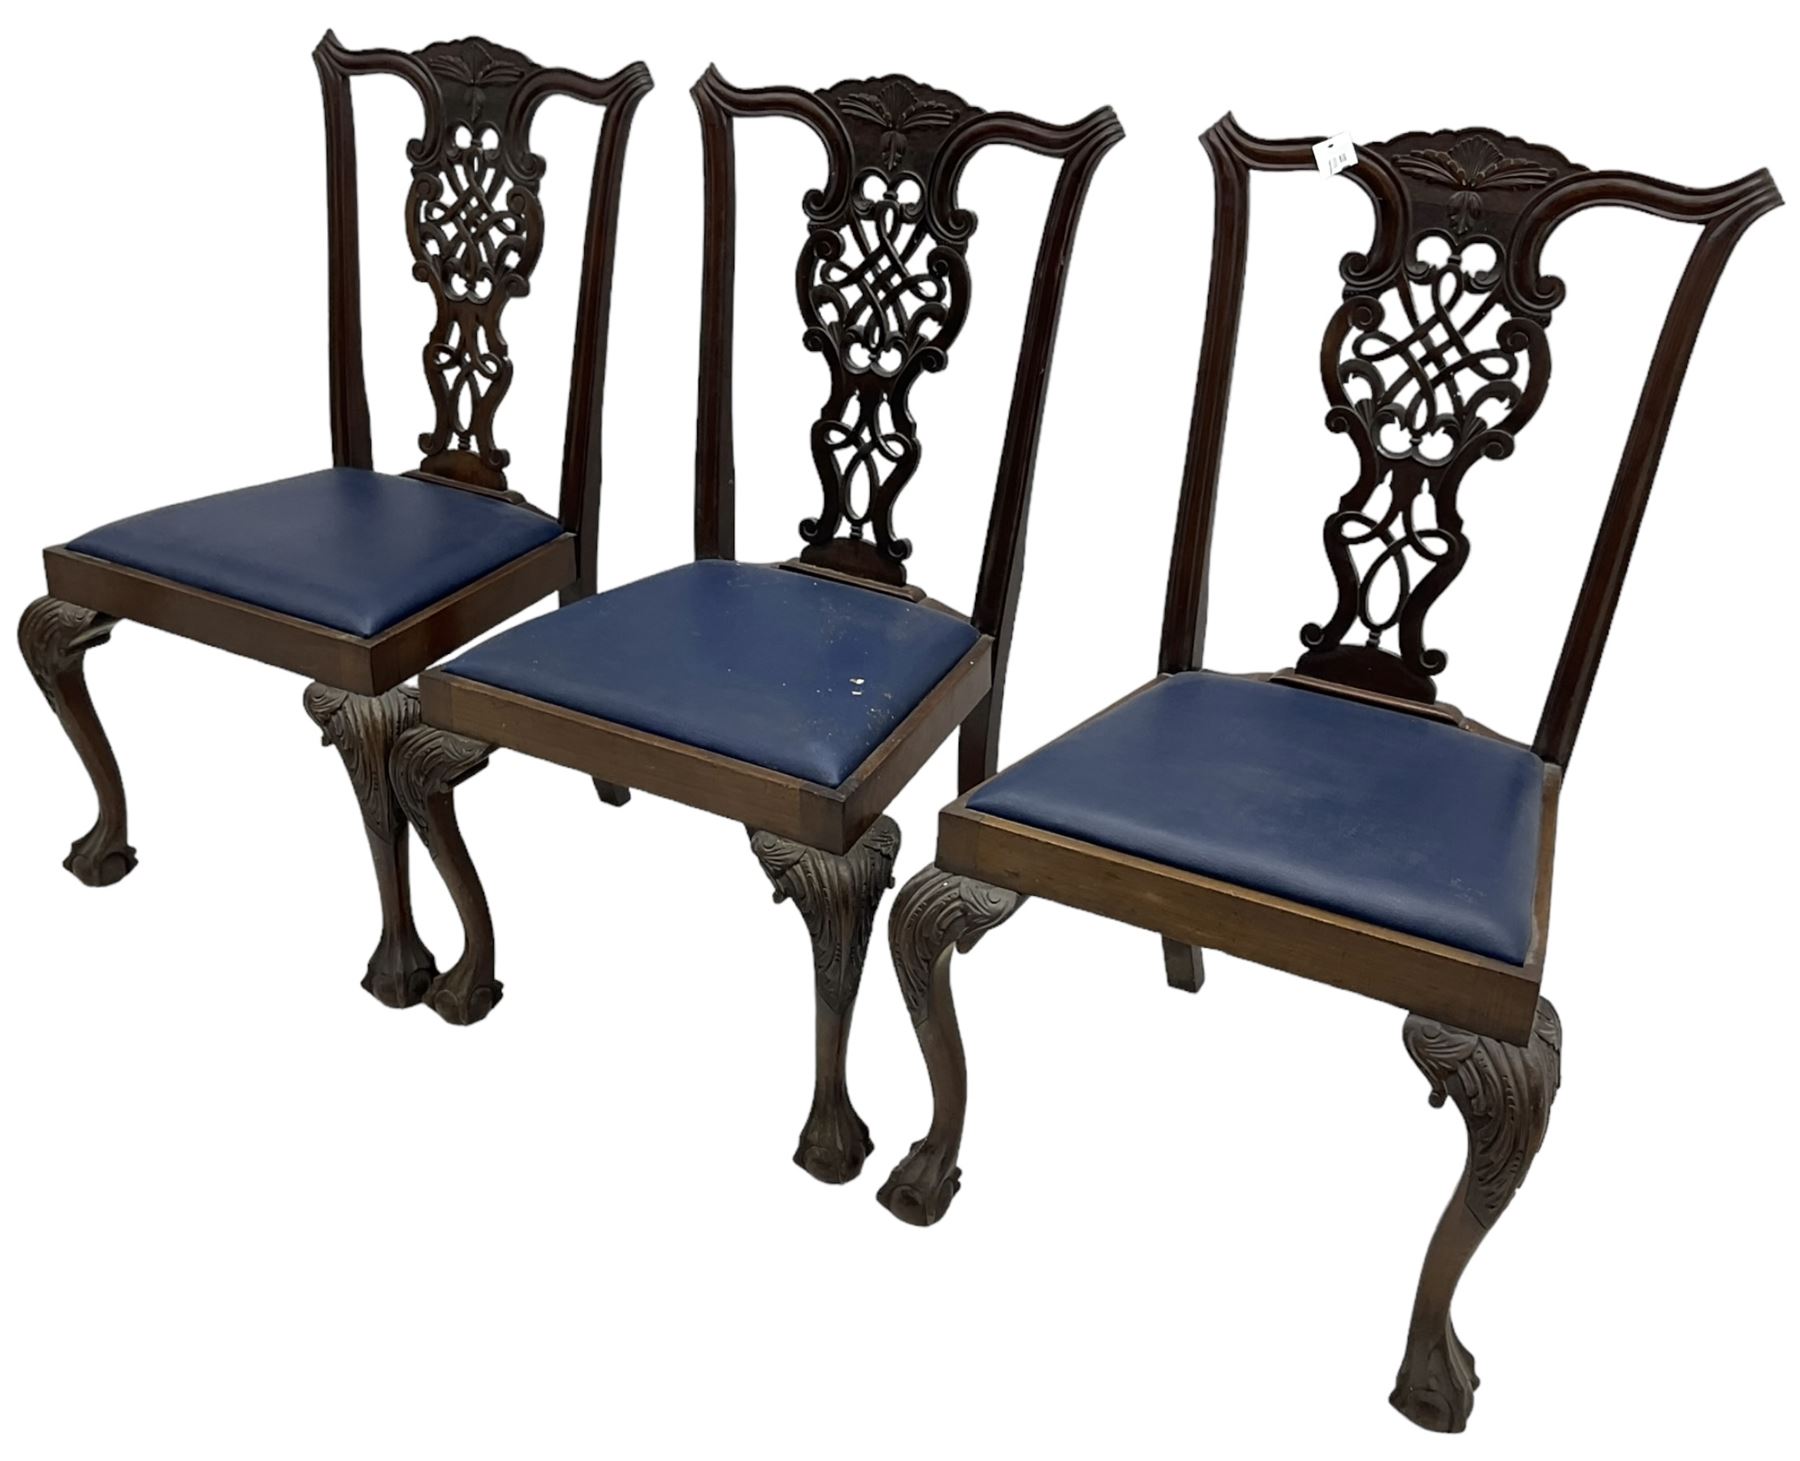 Set of six (5+1) Chippendale design mahogany dining chairs - Image 6 of 8